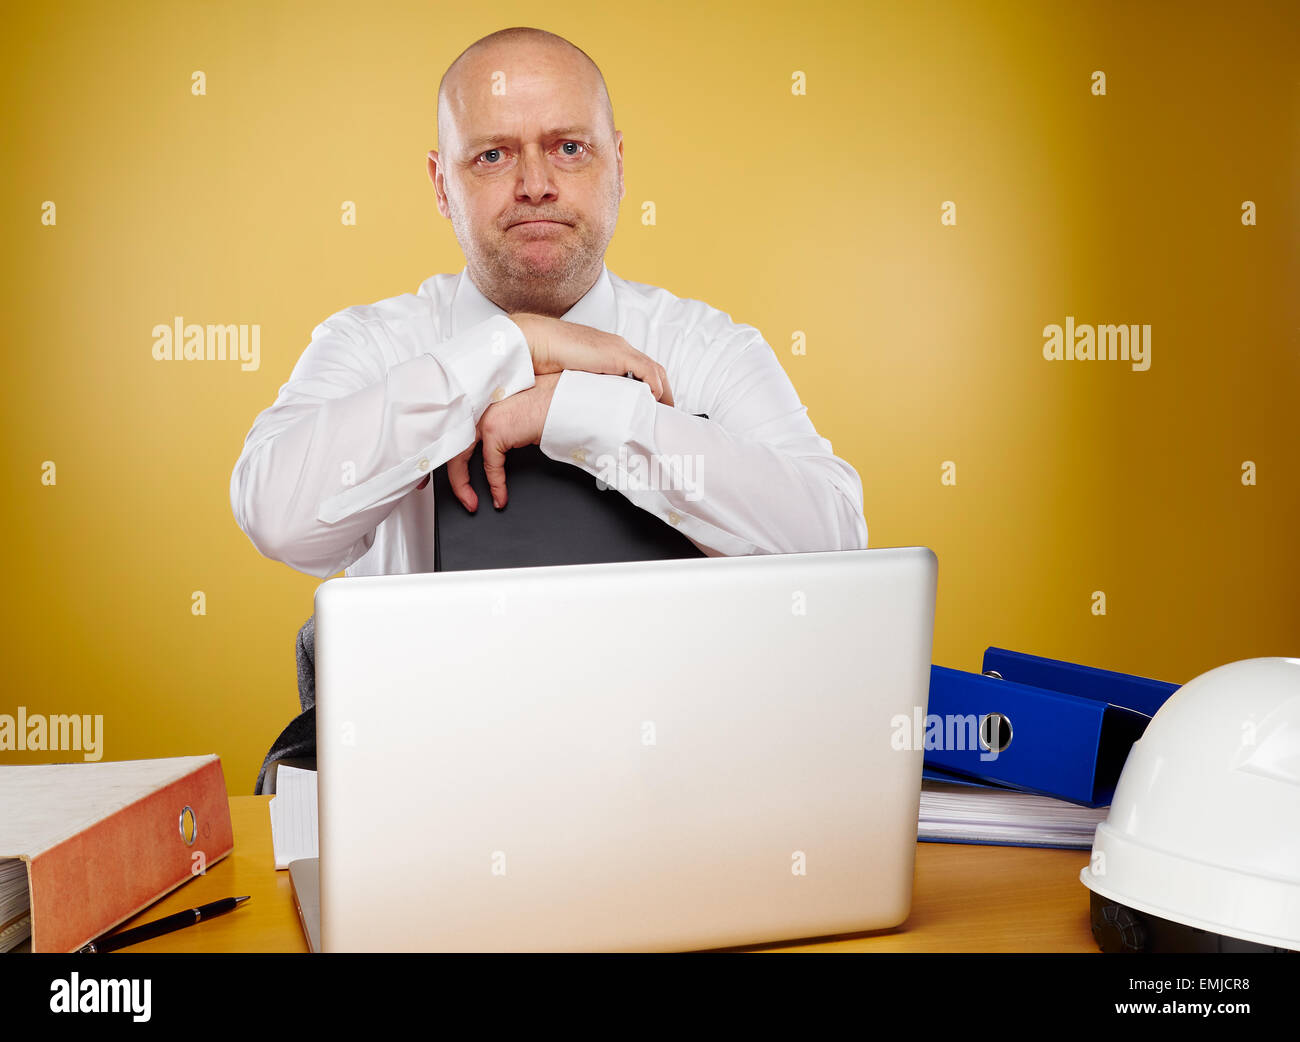 Hardworking male engineer in office, he wearing a white shirt and tie, the laptop, binders and white hard hat is on the table Stock Photo